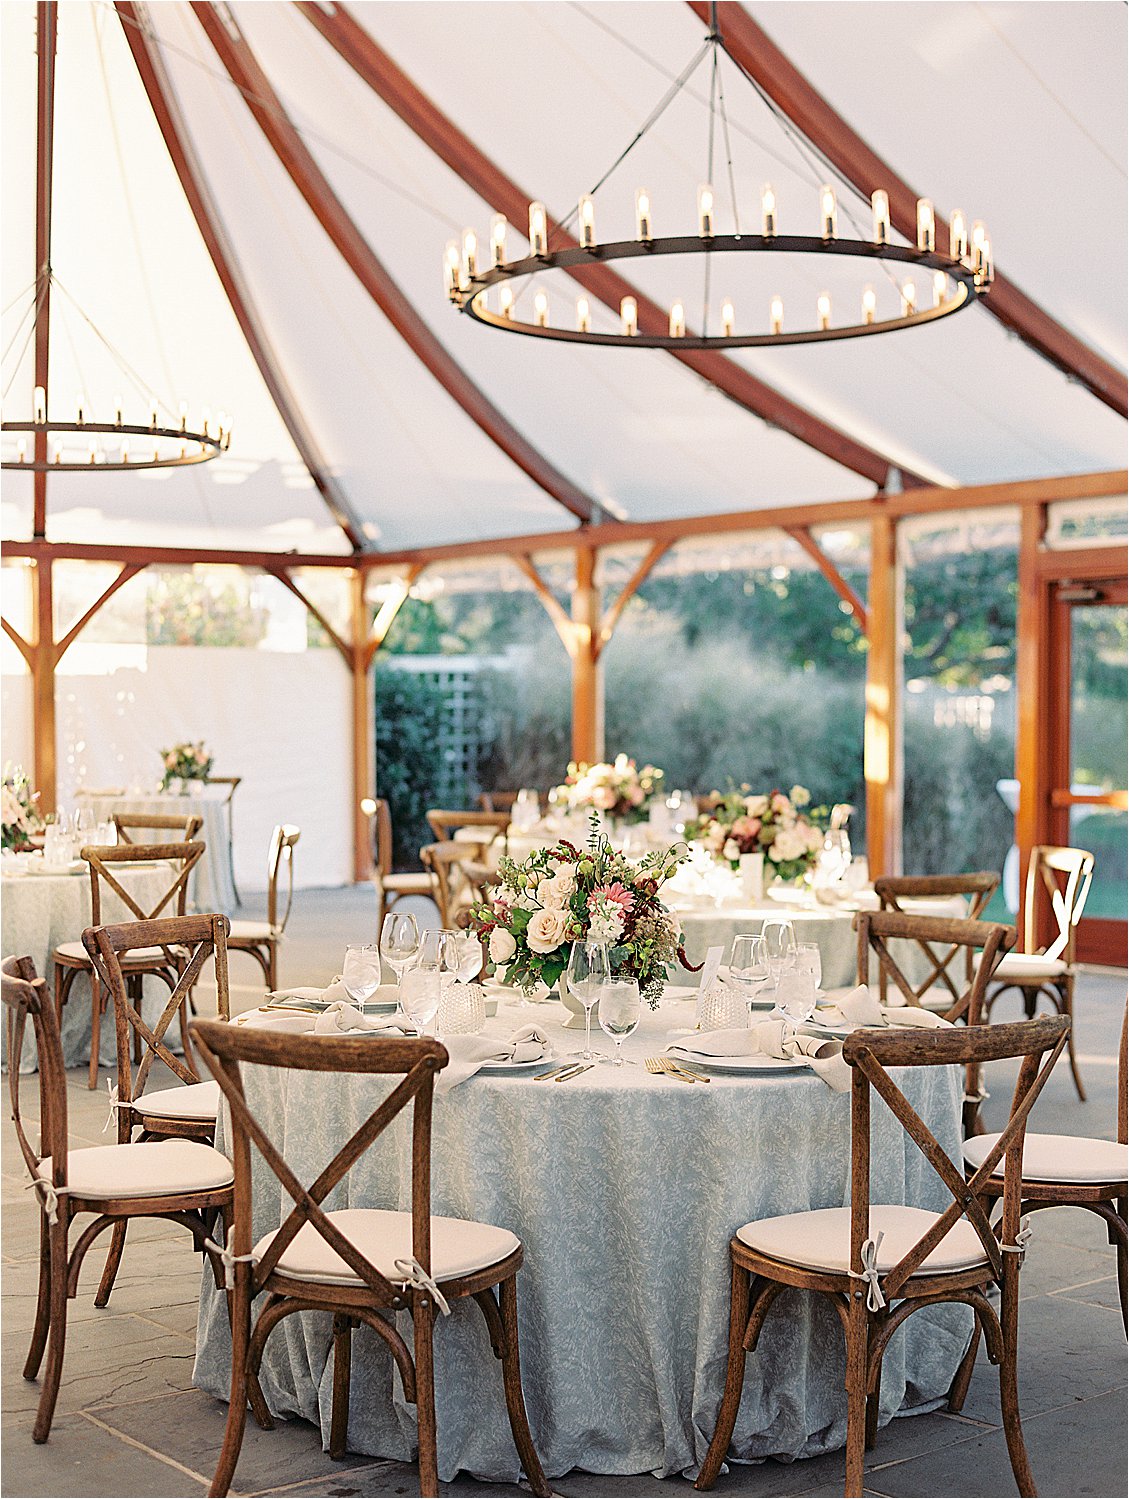 Tented wedding reception at the Inn at Perry Cabin